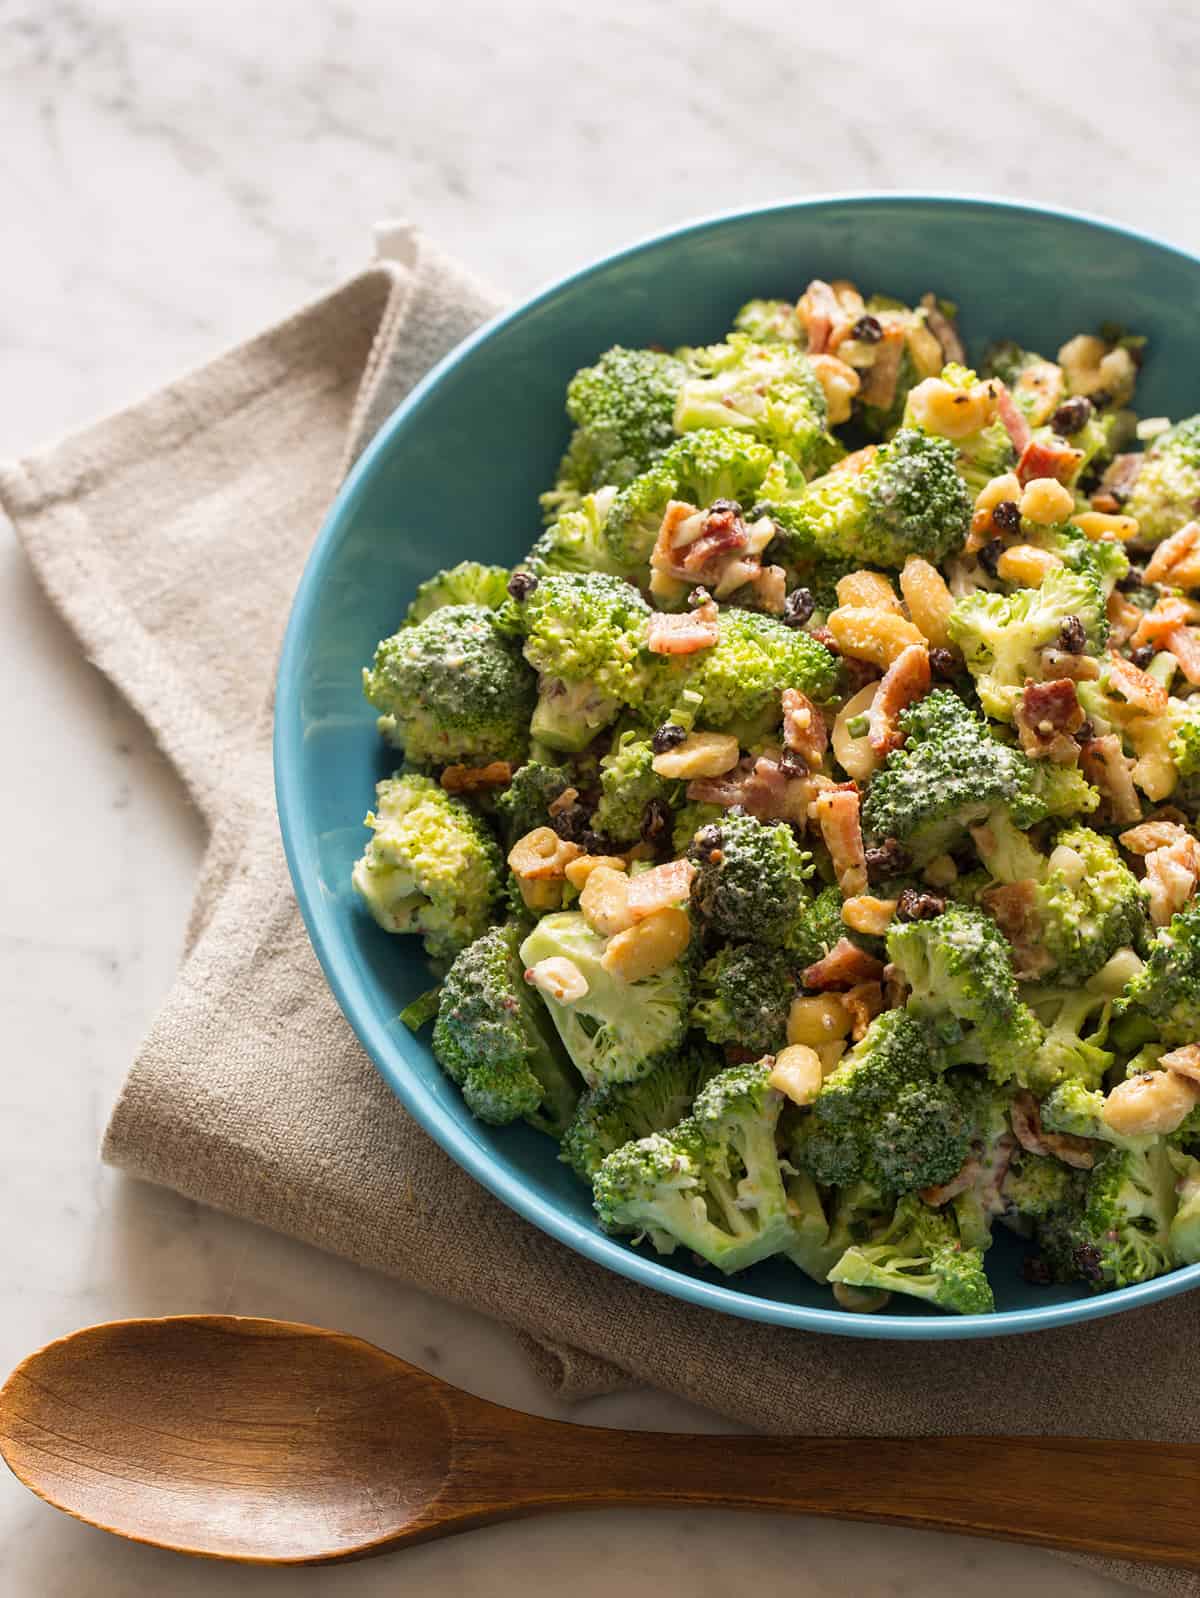 A bowl of broccoli crunch salad with a napkin and a wooden spoon.